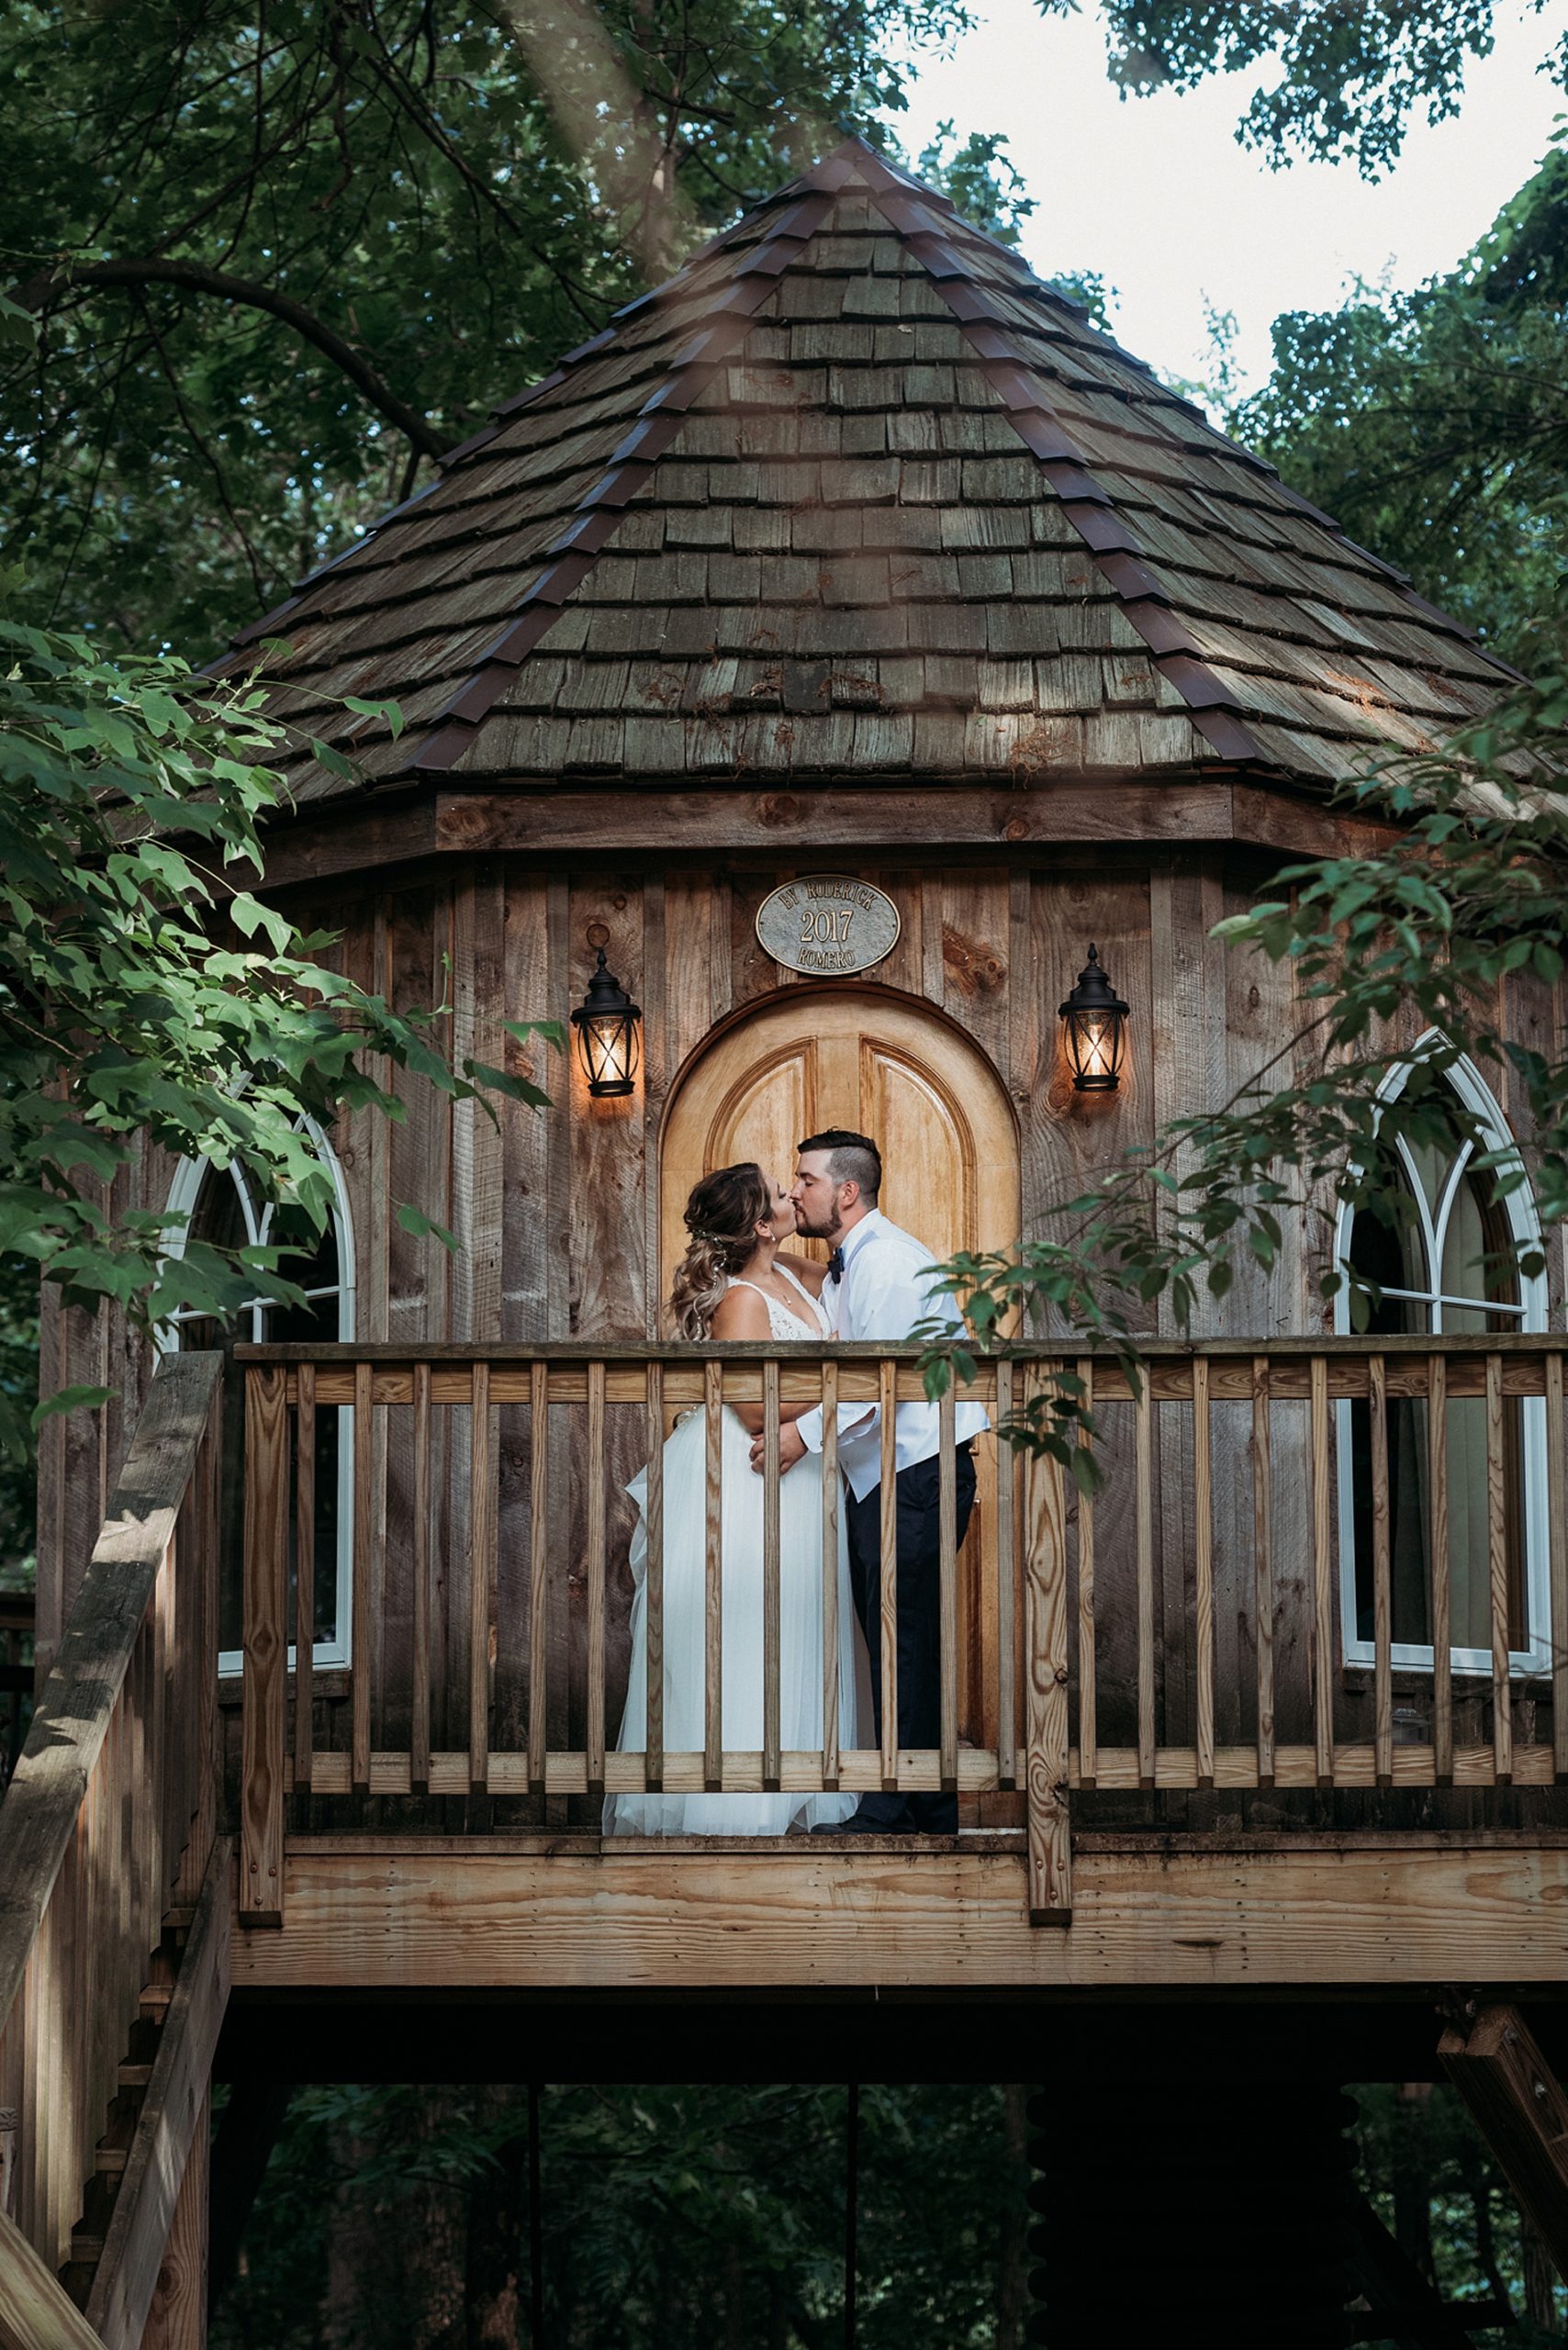 Bride and groom stand on balcony of treehouse at the Grand Barn at the Mohicans one of The Top 14 Barn Wedding Venues in Ohio